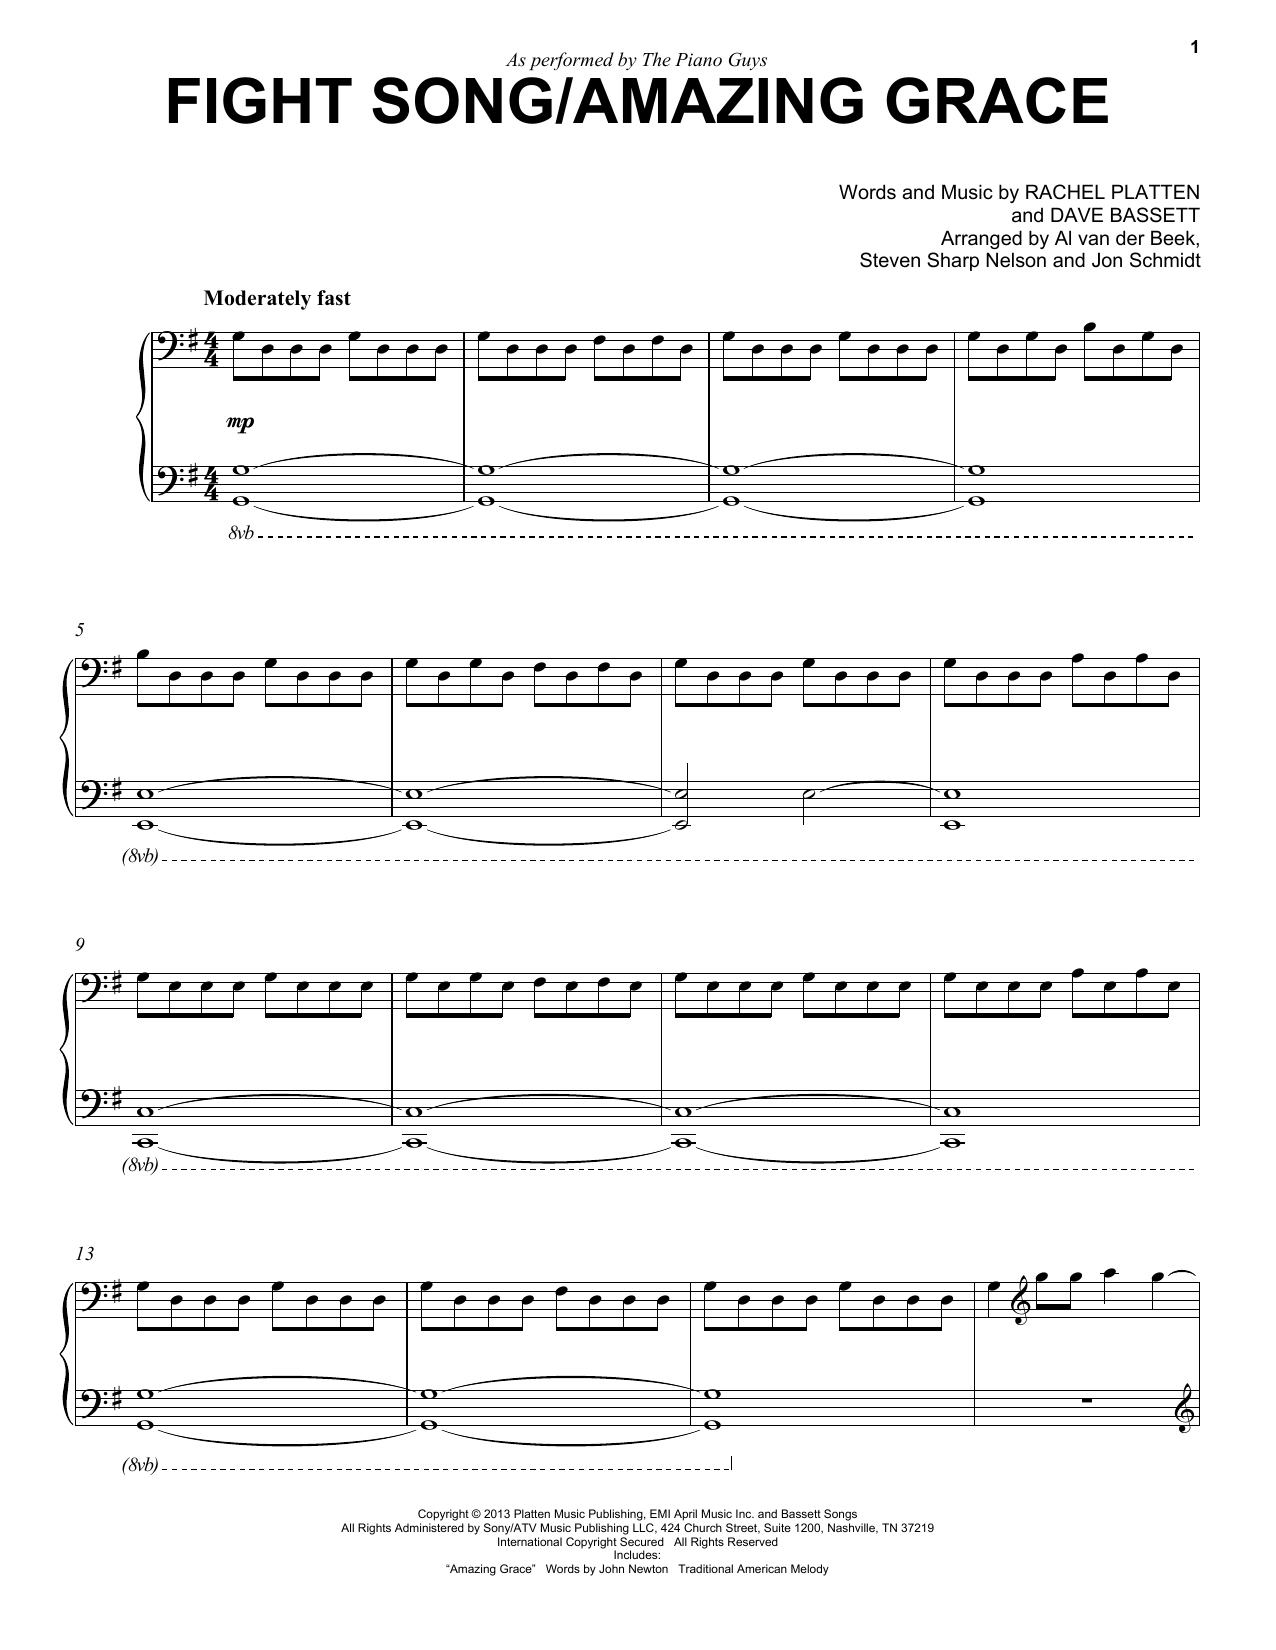 Download The Piano Guys Fight Song/Amazing Grace Sheet Music